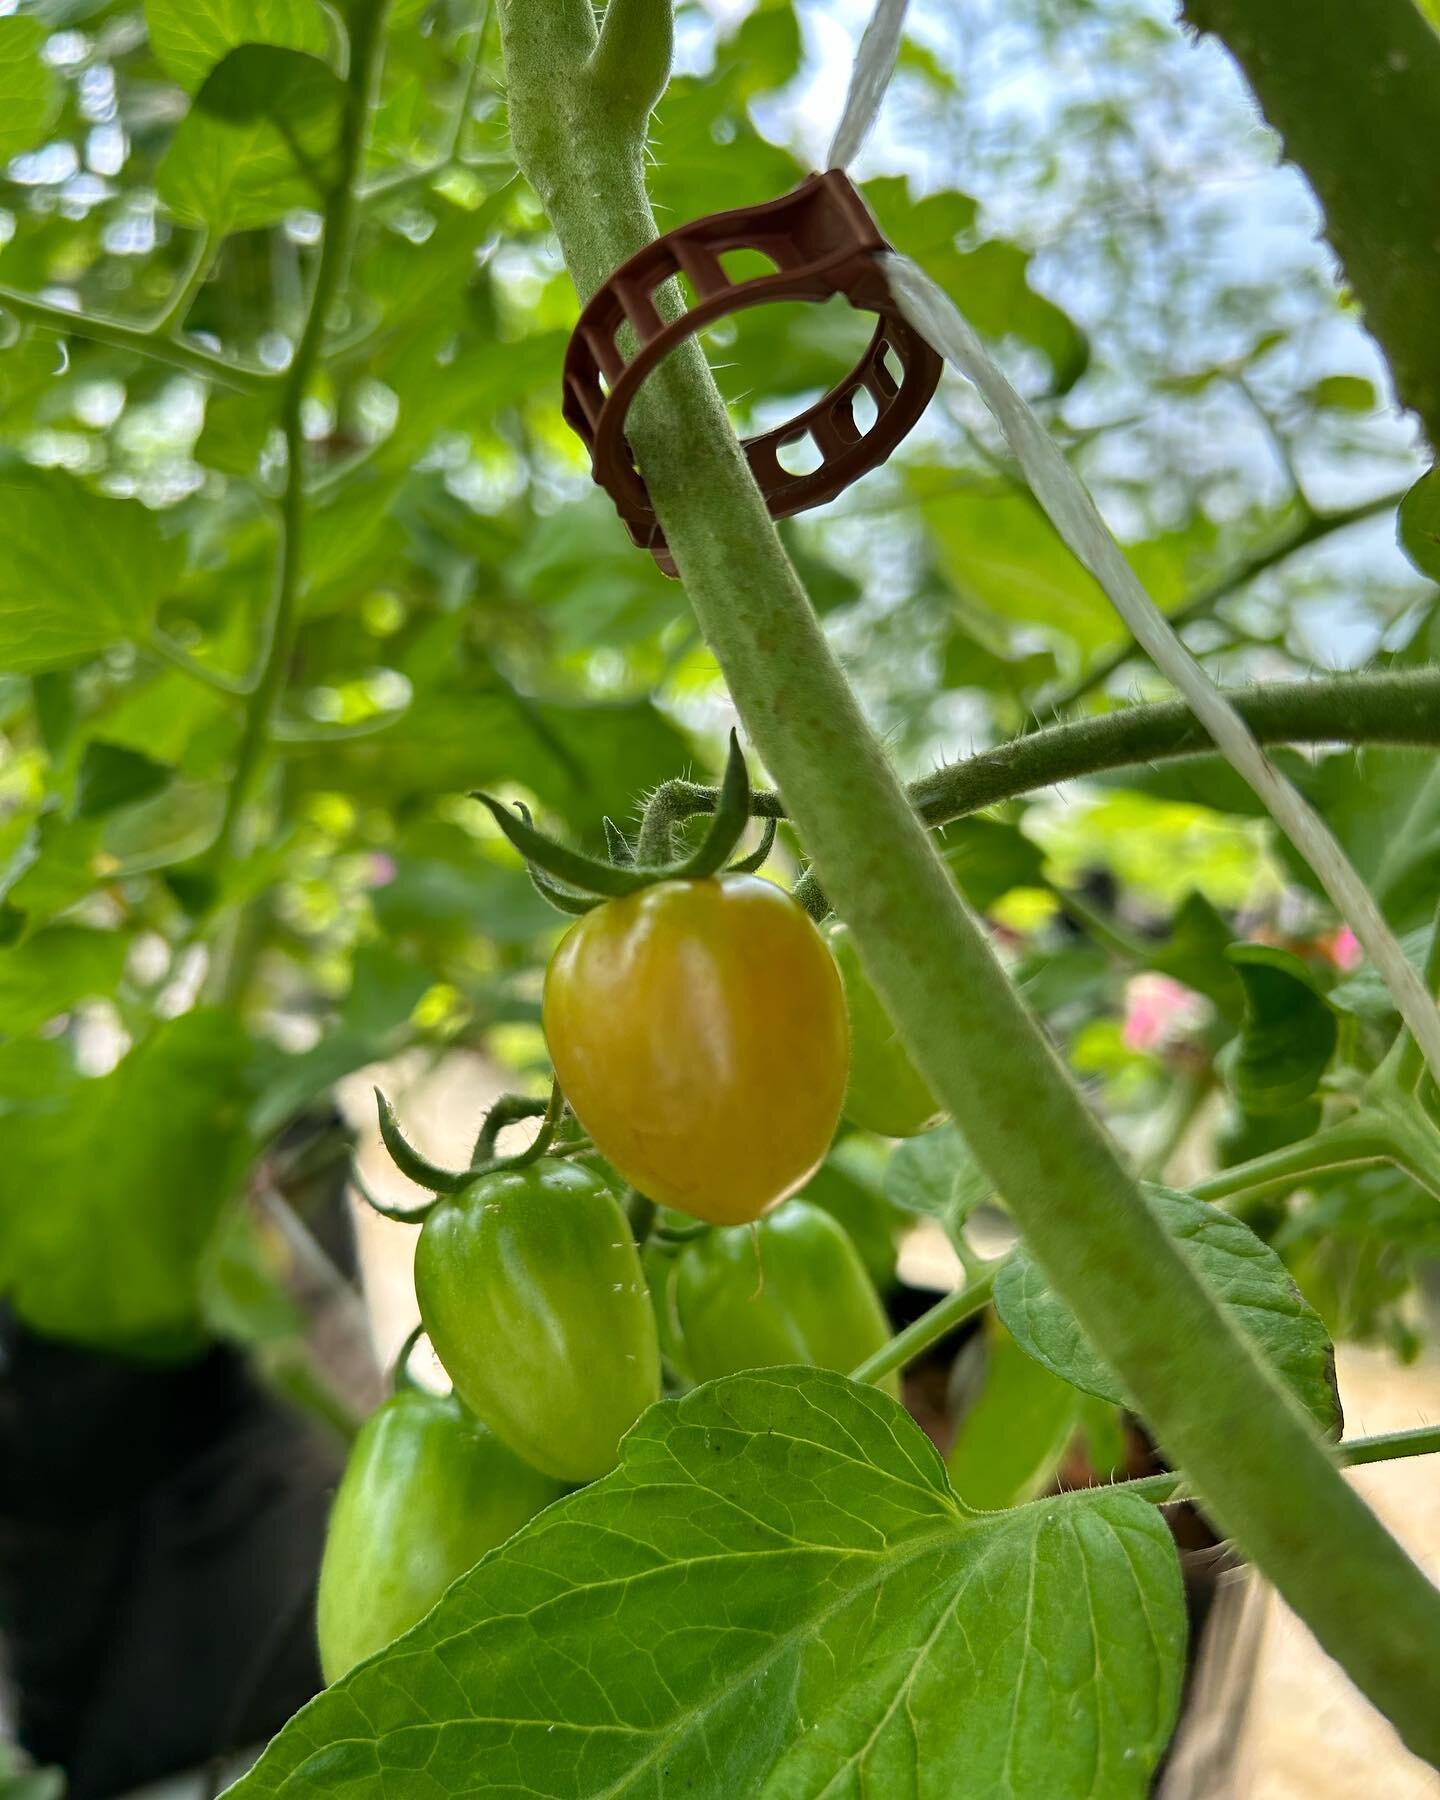 Our first grape tomato turning in our greenhouse!  Large tomatoes are coming along, fields prepared for planting!